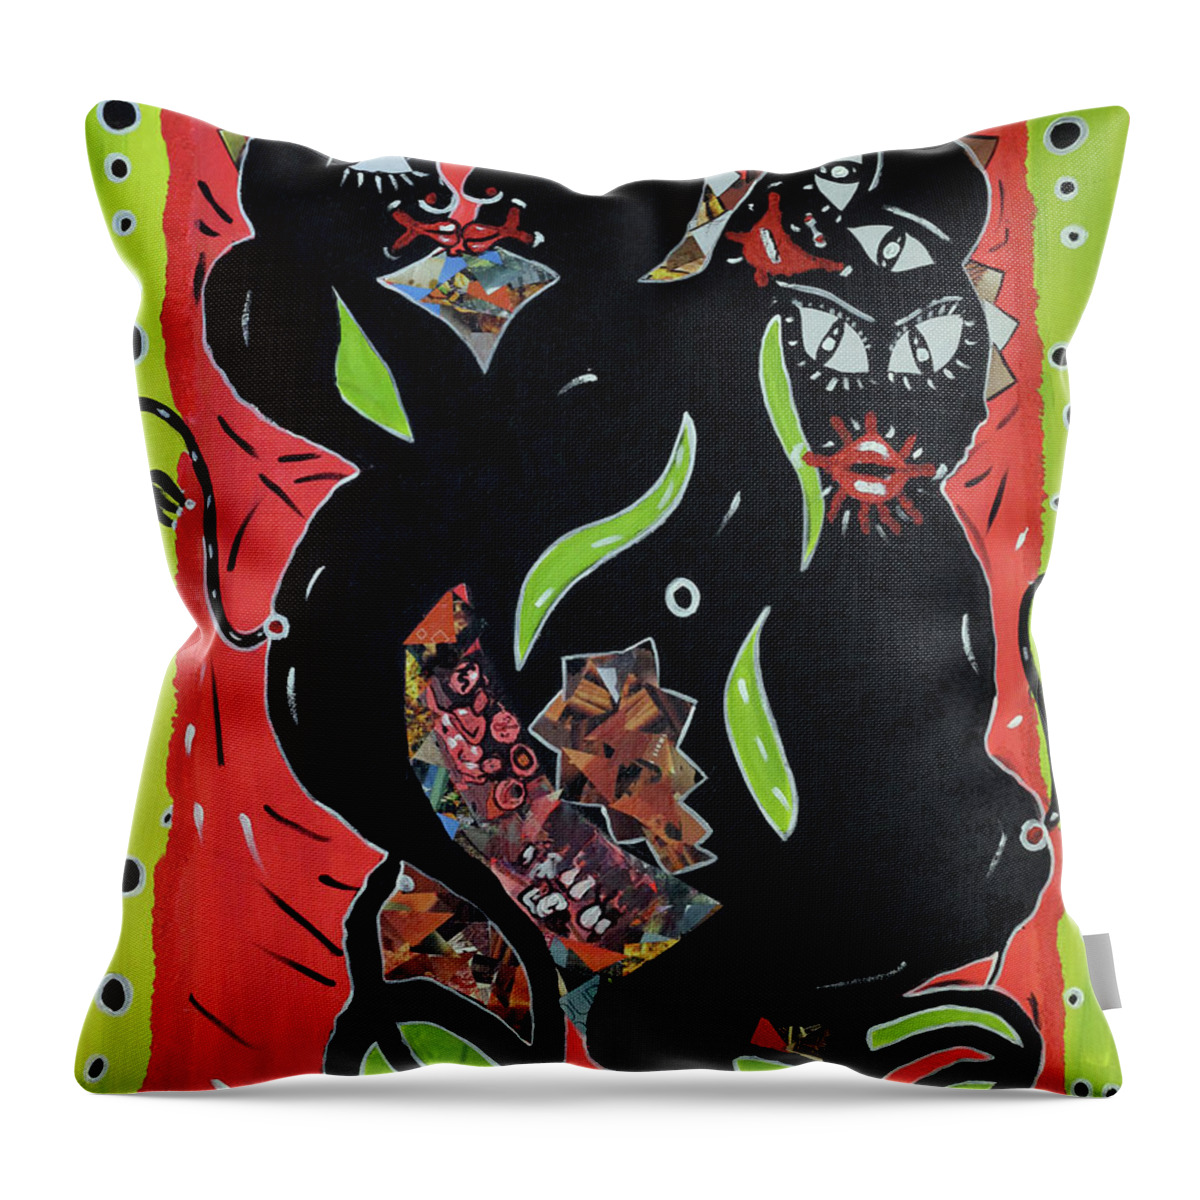 Soweto Throw Pillow featuring the painting Cats In A Sack by Nkuly Sibeko